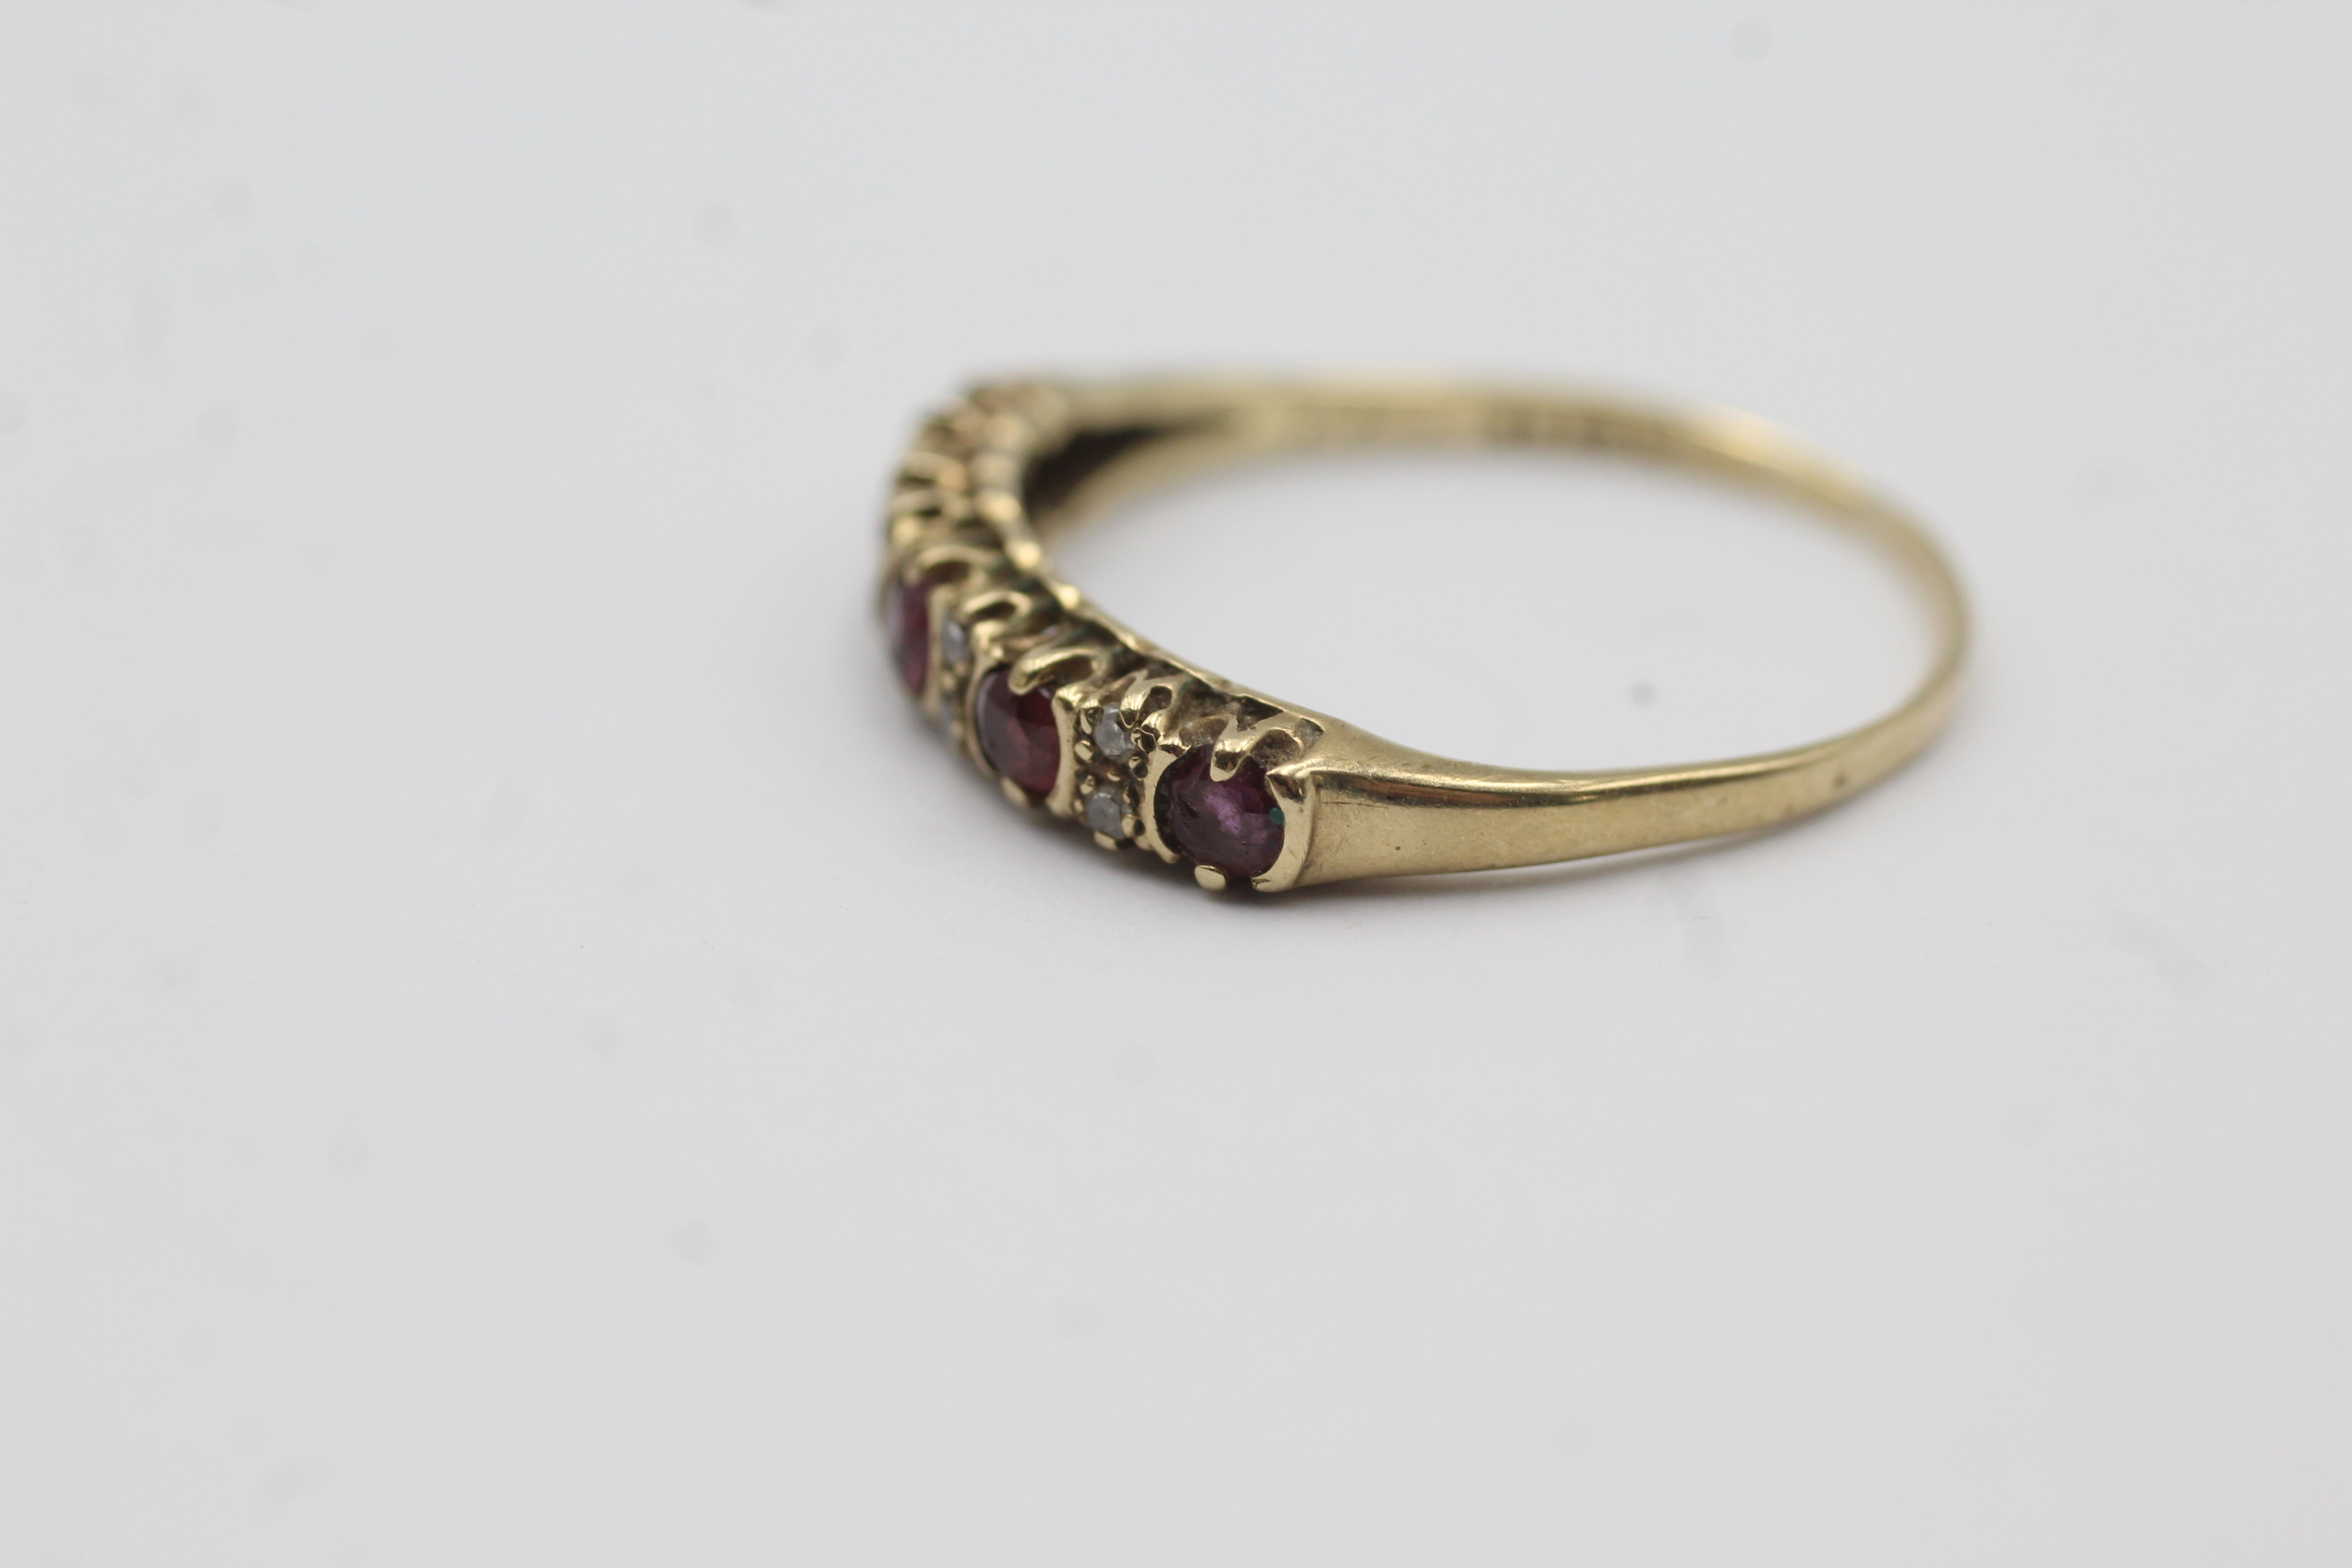 9ct gold ruby five stone ring with diamond spacers (1.4g) - Image 3 of 7